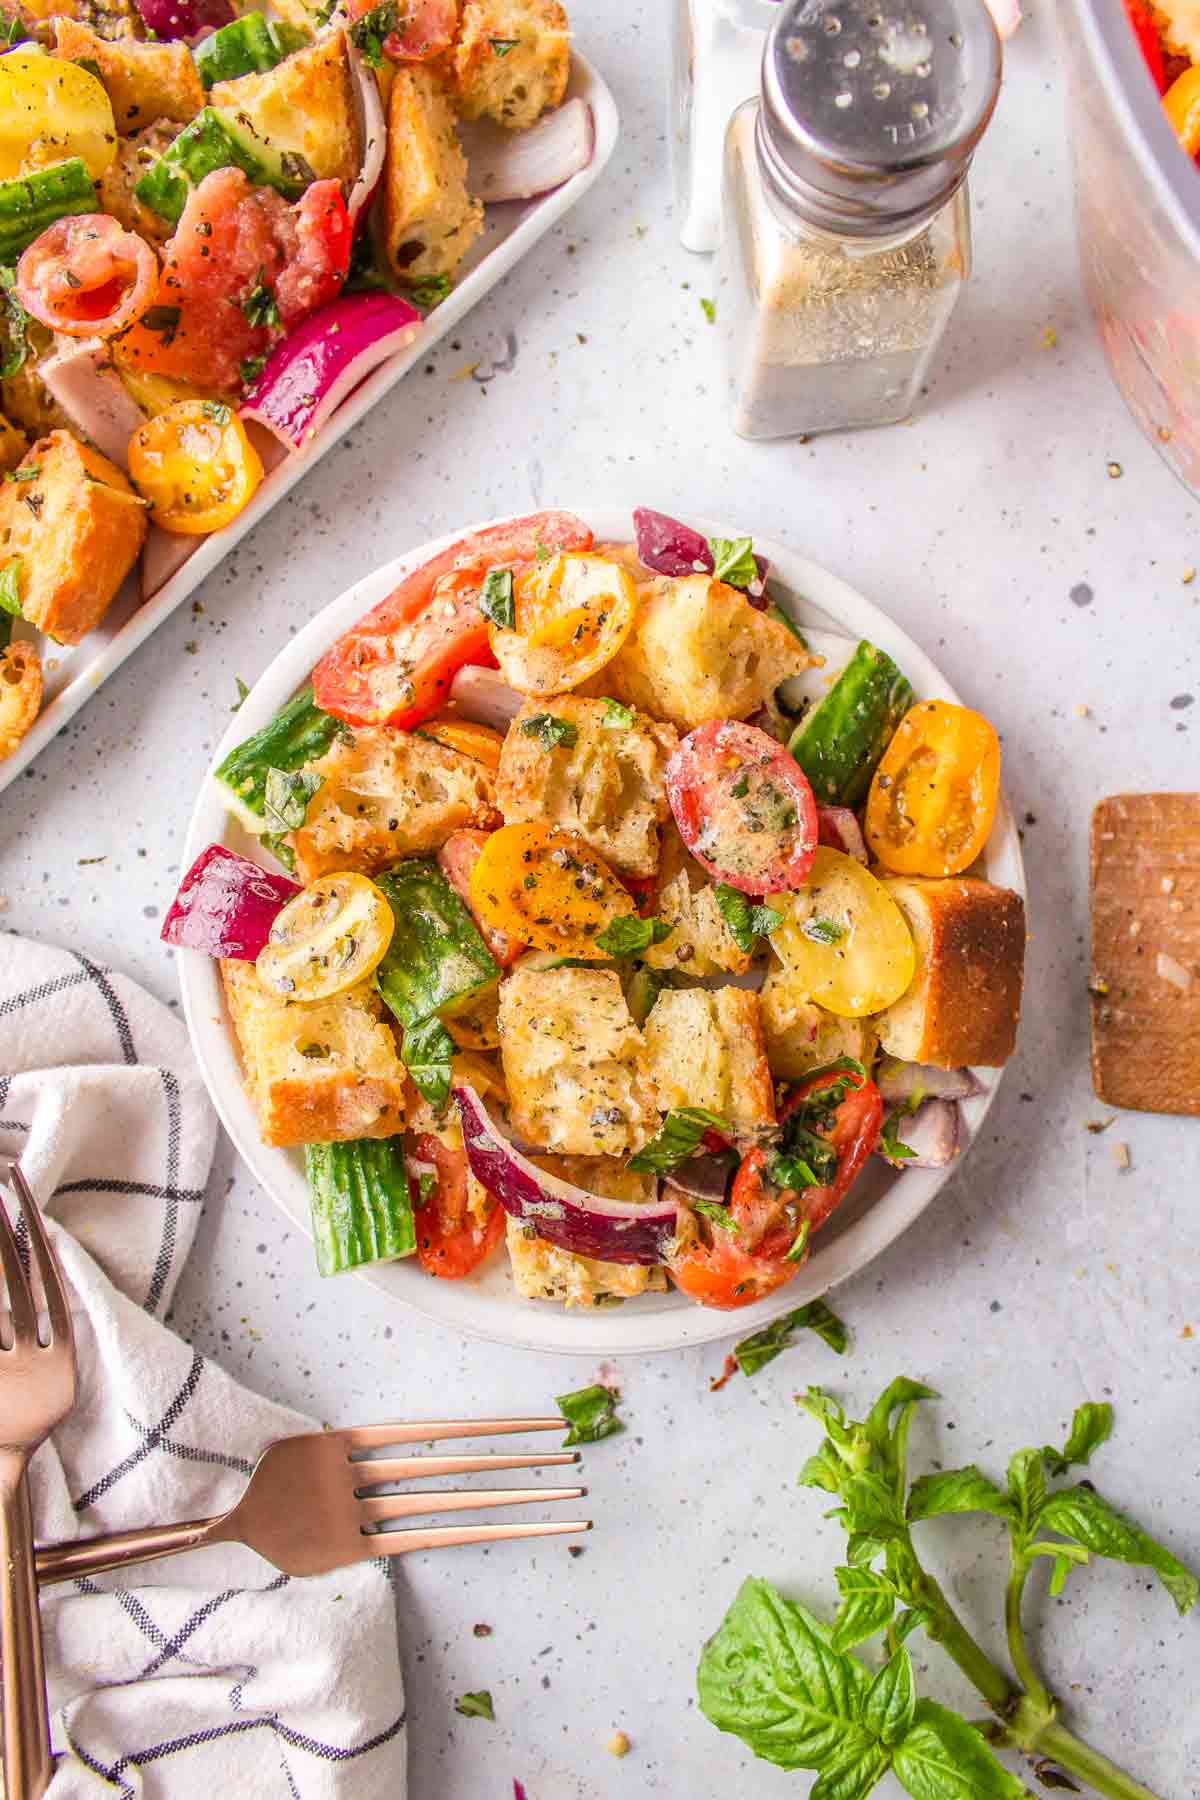 Summer Panzanella Salad with Tomatoes and Cucumbers